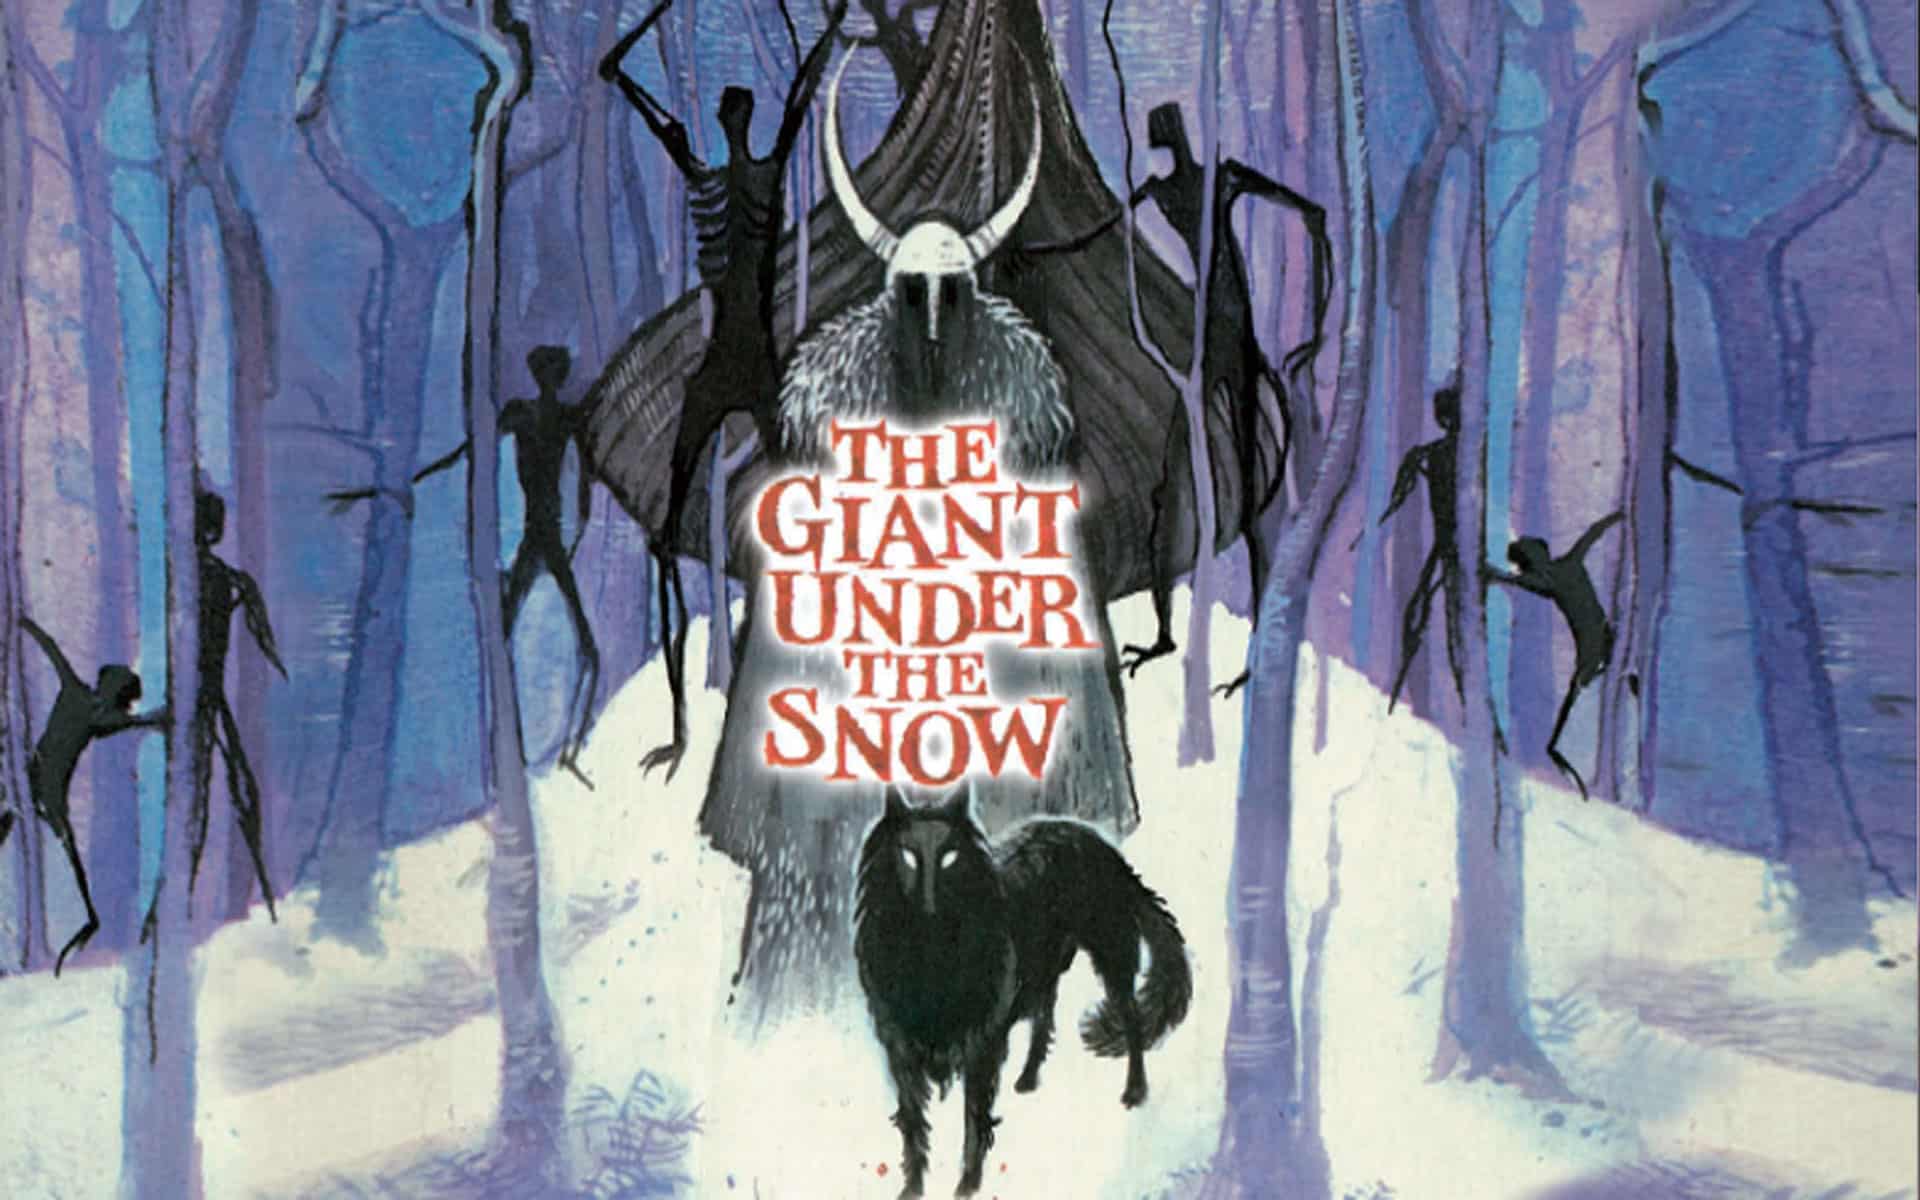 amp-giant-under-the-snow-2021-banner-01